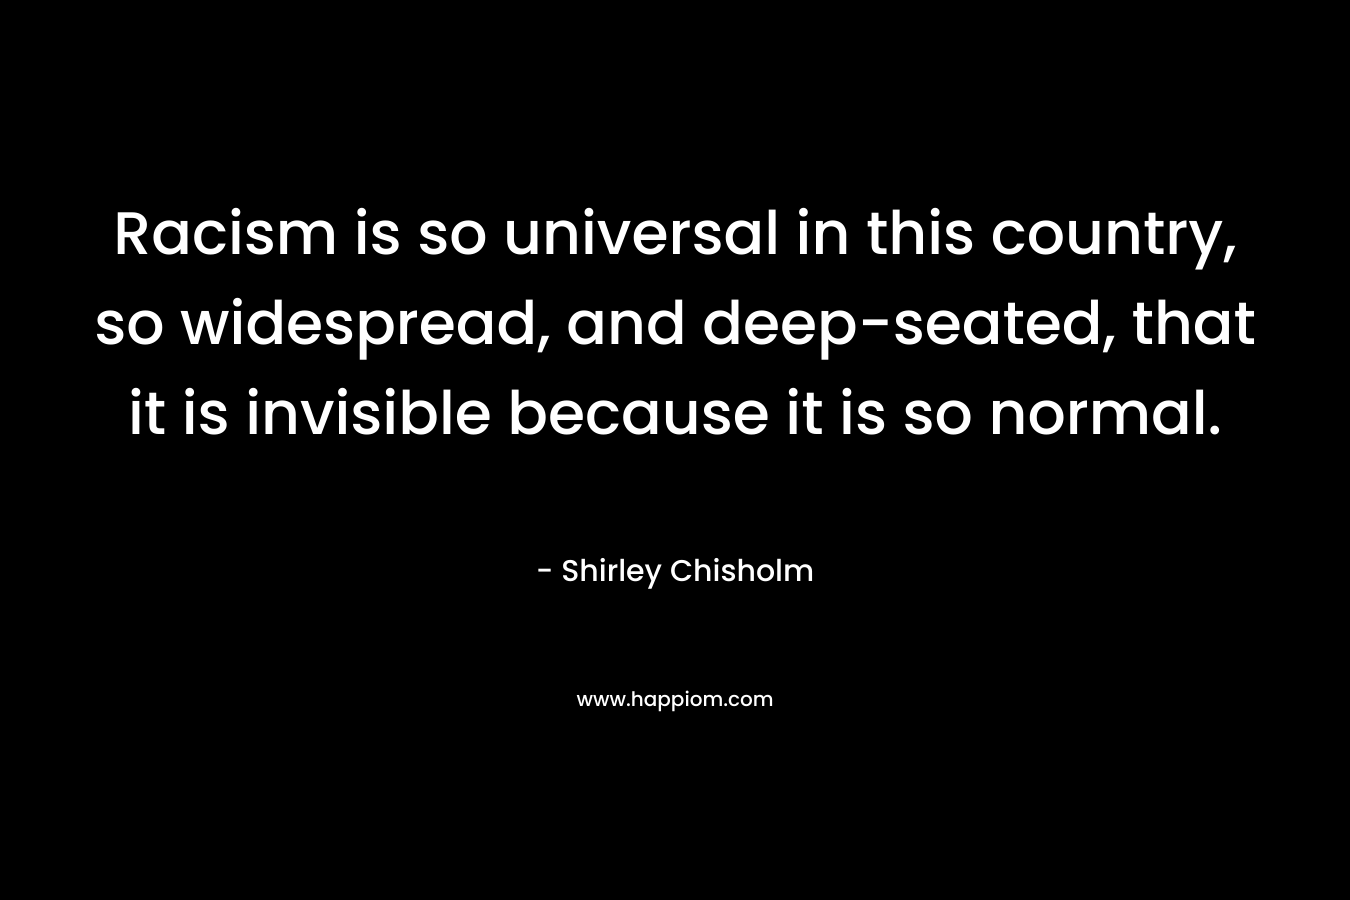 Racism is so universal in this country, so widespread, and deep-seated, that it is invisible because it is so normal. – Shirley Chisholm